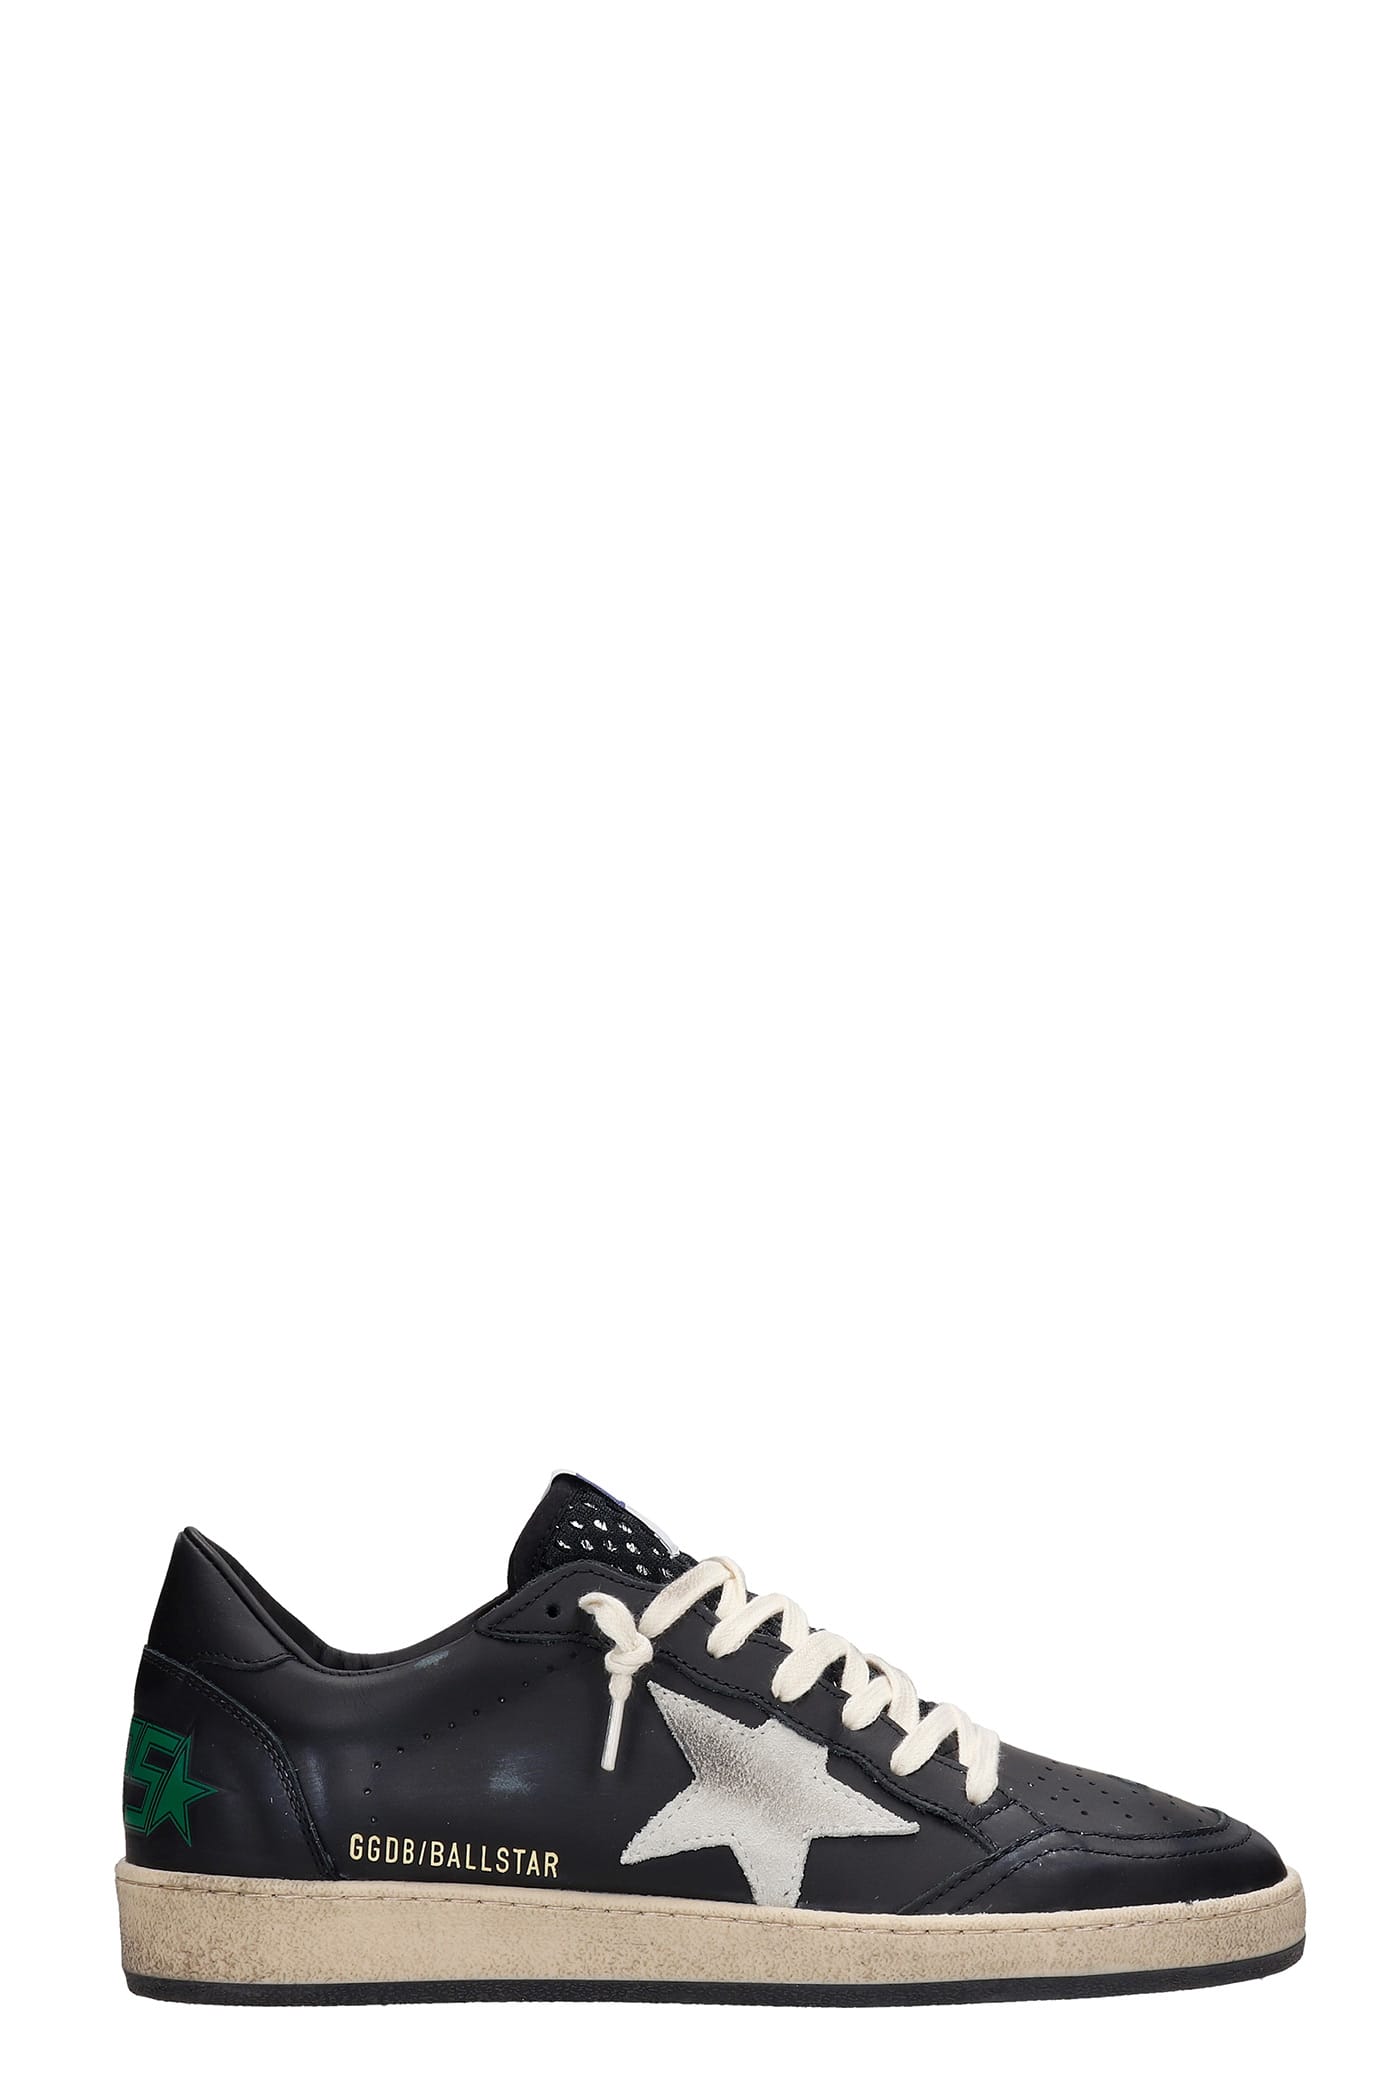 Golden Goose Ball Star Sneakers In Black Leather